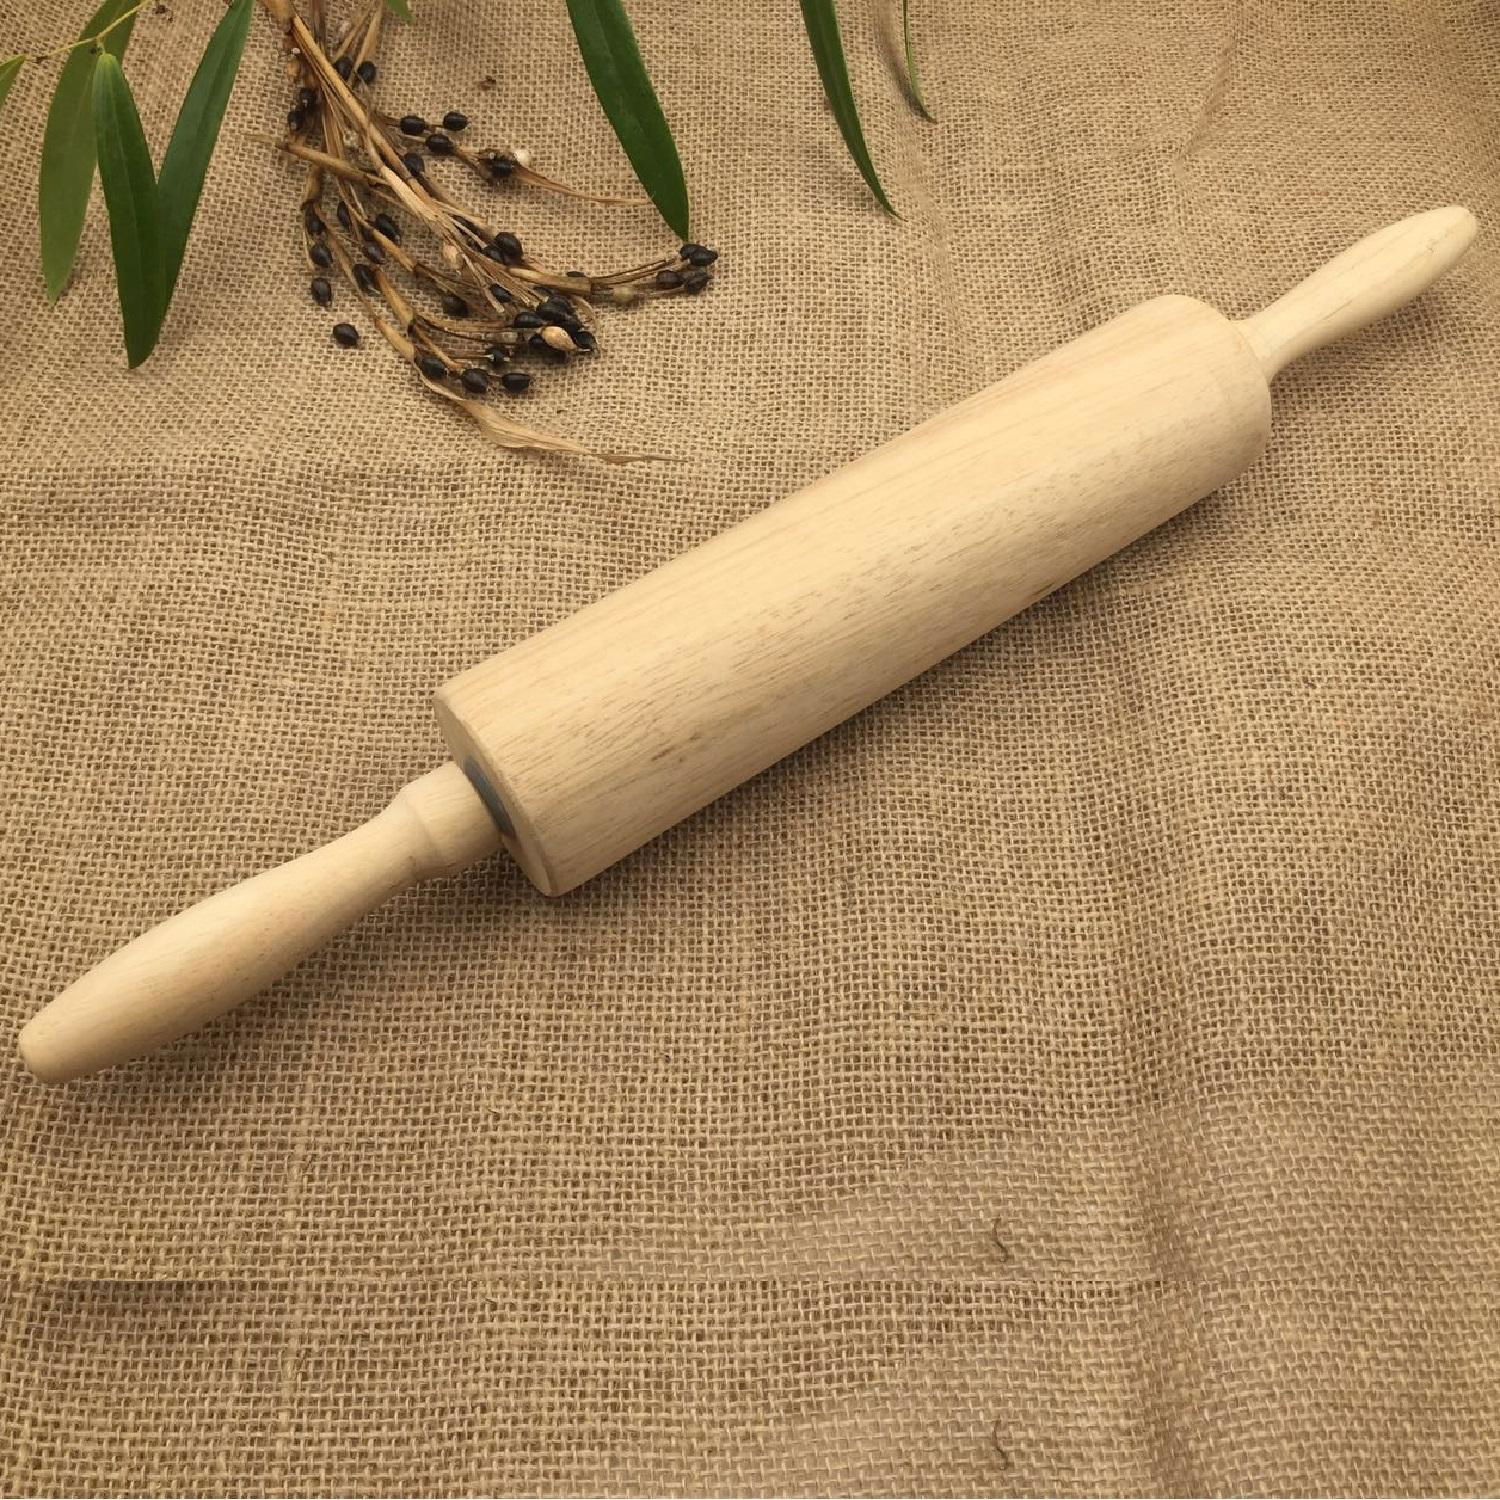 Wooden Rolling Pin Made of Rubber Wood 2